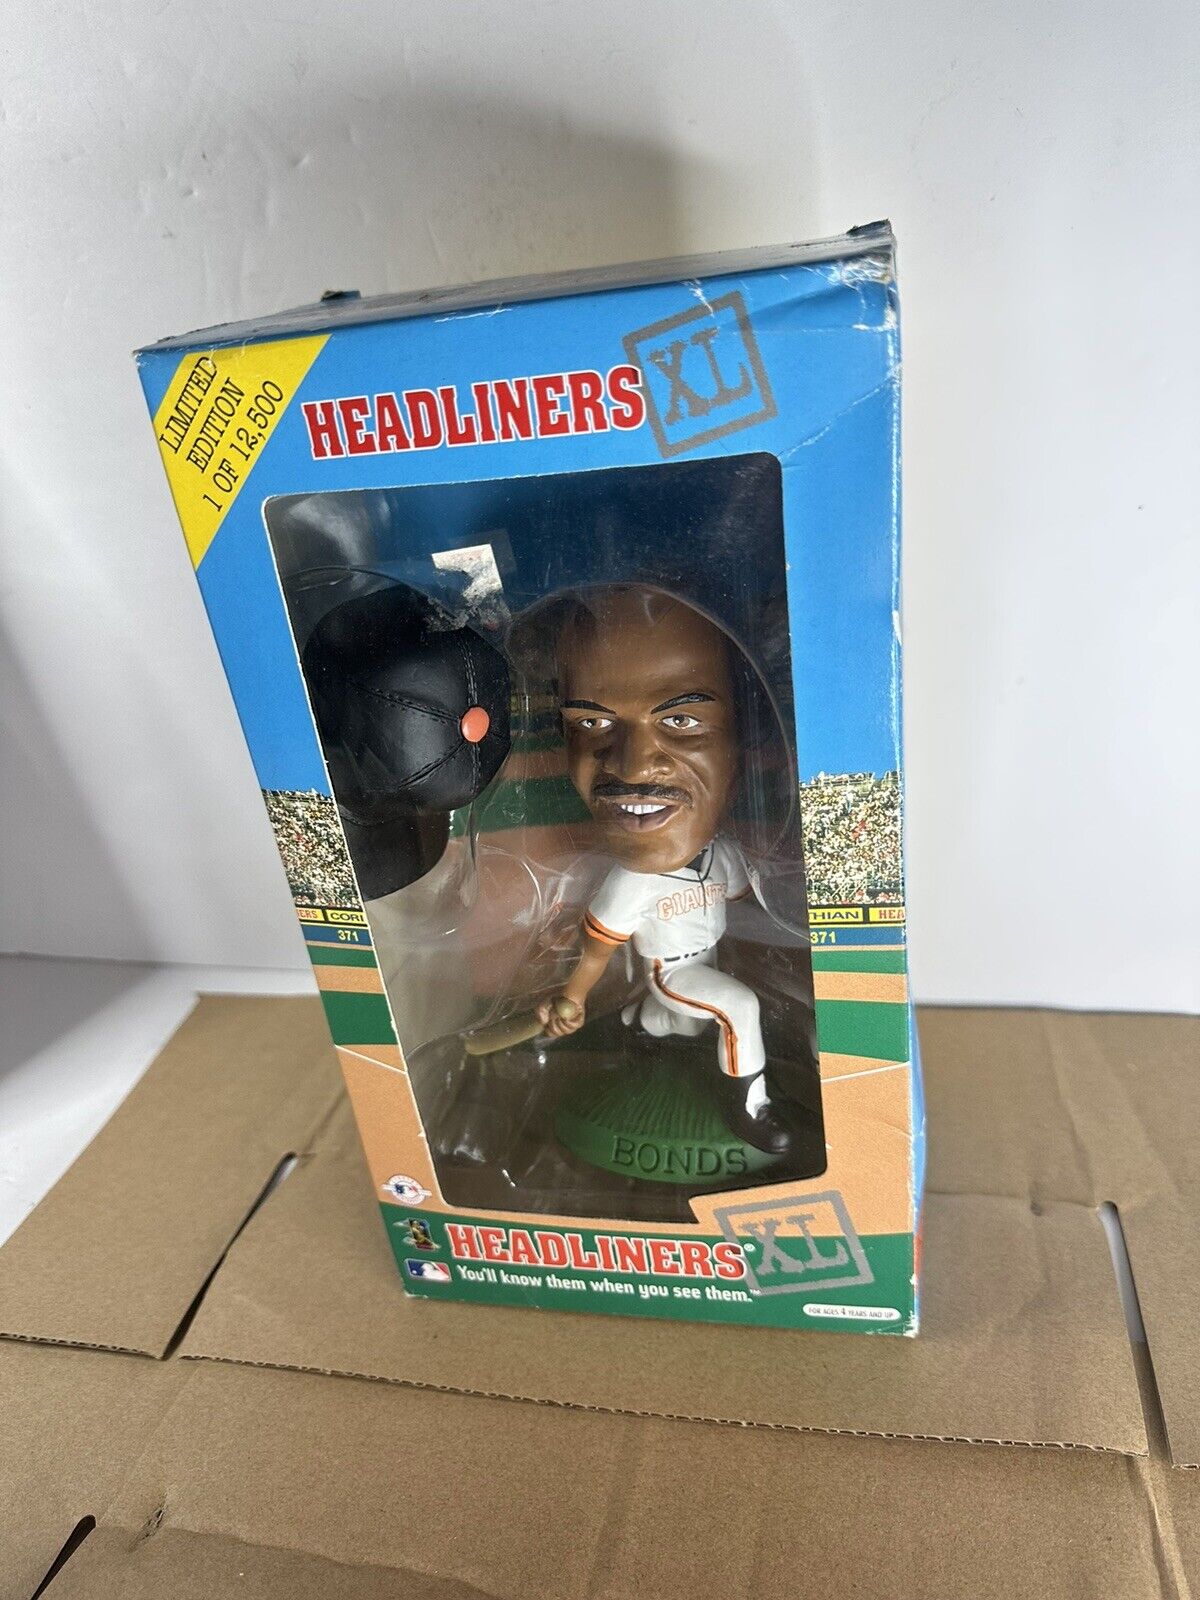 Headliners Barry Bonds XL Bobblehead 1 of 12,500 Limited Edition Sealed - 1998